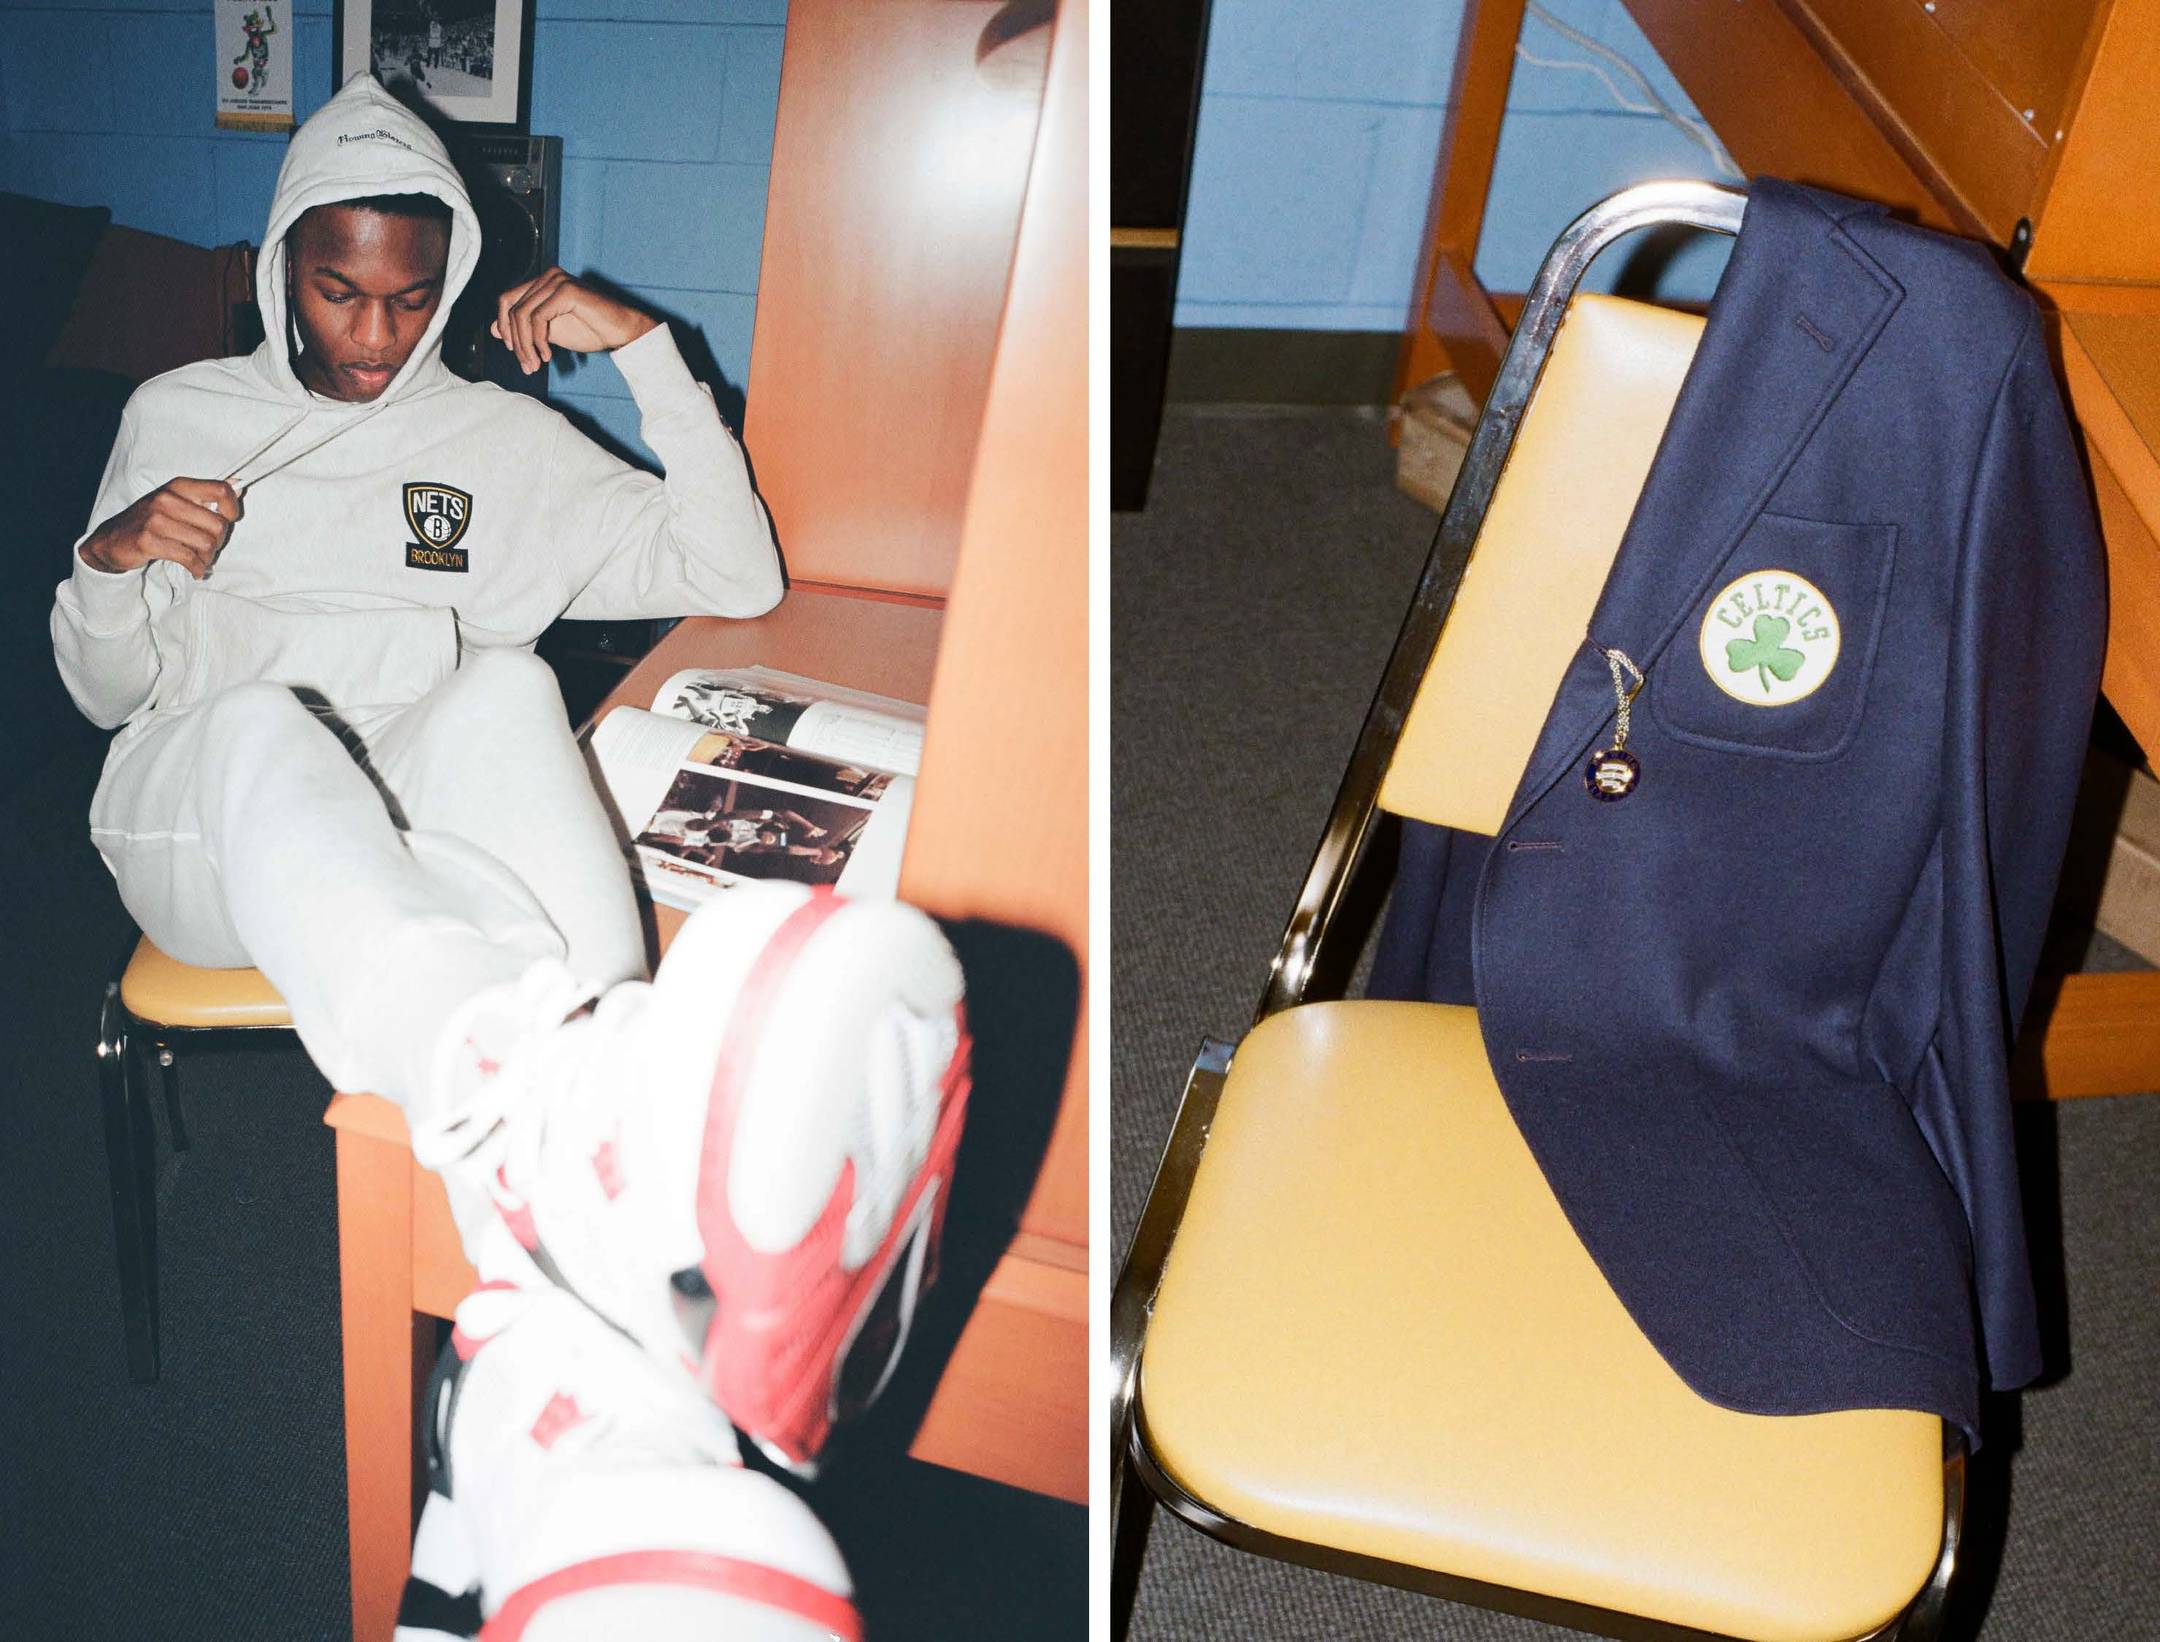 Model in a dorm room wearing the Brooklyn Nets Hoodie and Joggers. The Boston Celtics Navy Club Blazer hanging on a chair.